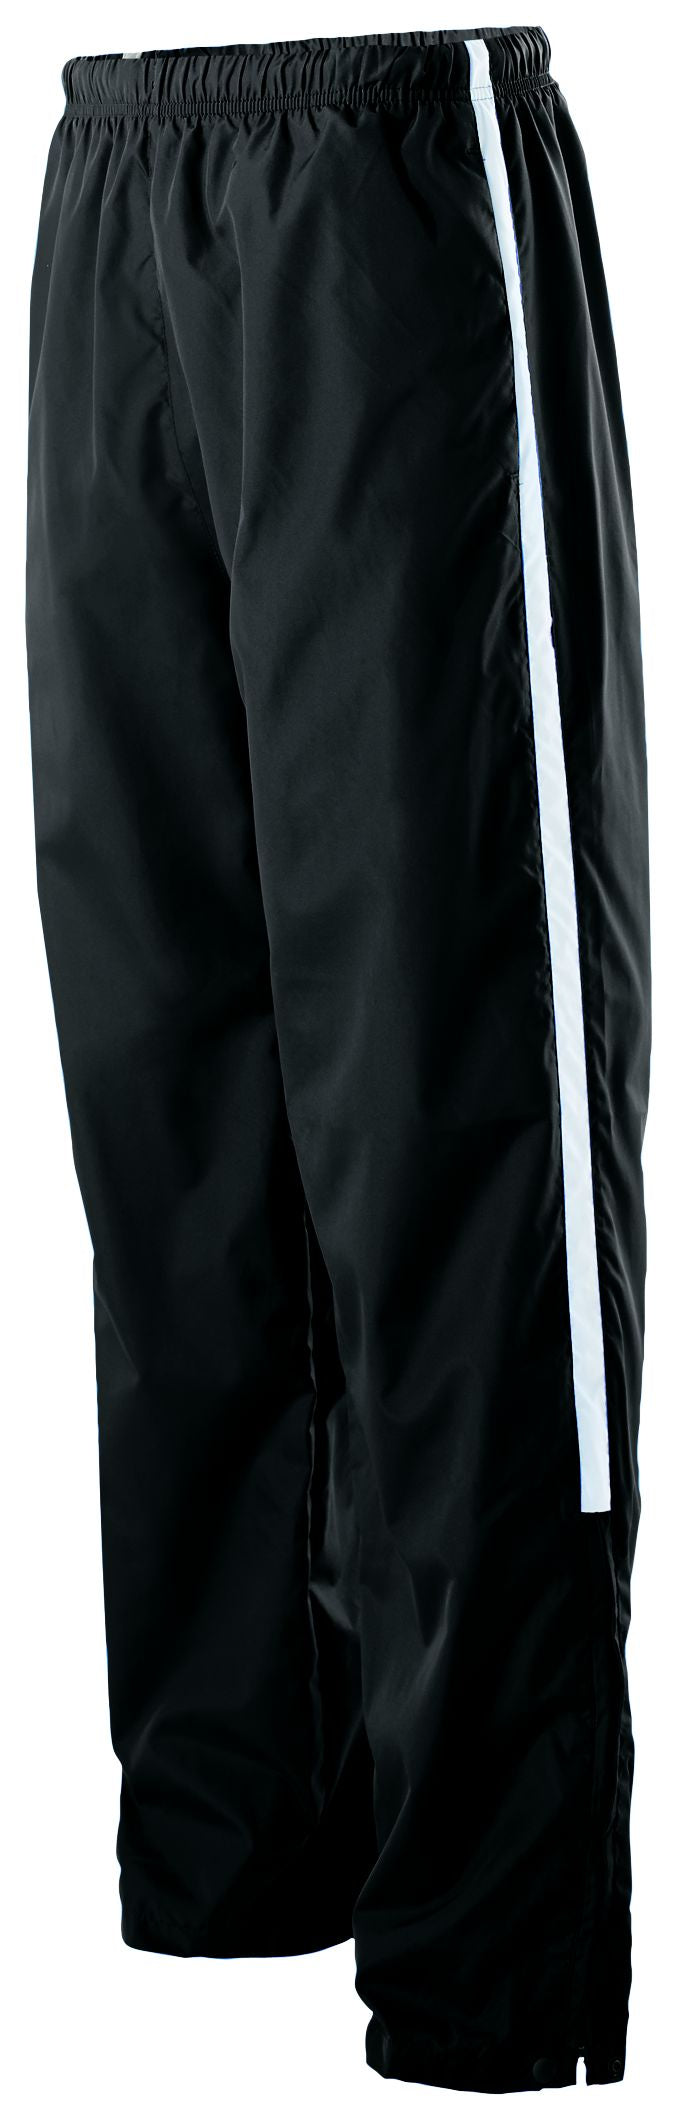 Holloway Sable Pant in Black/White  -Part of the Adult, Adult-Pants, Pants, Holloway product lines at KanaleyCreations.com